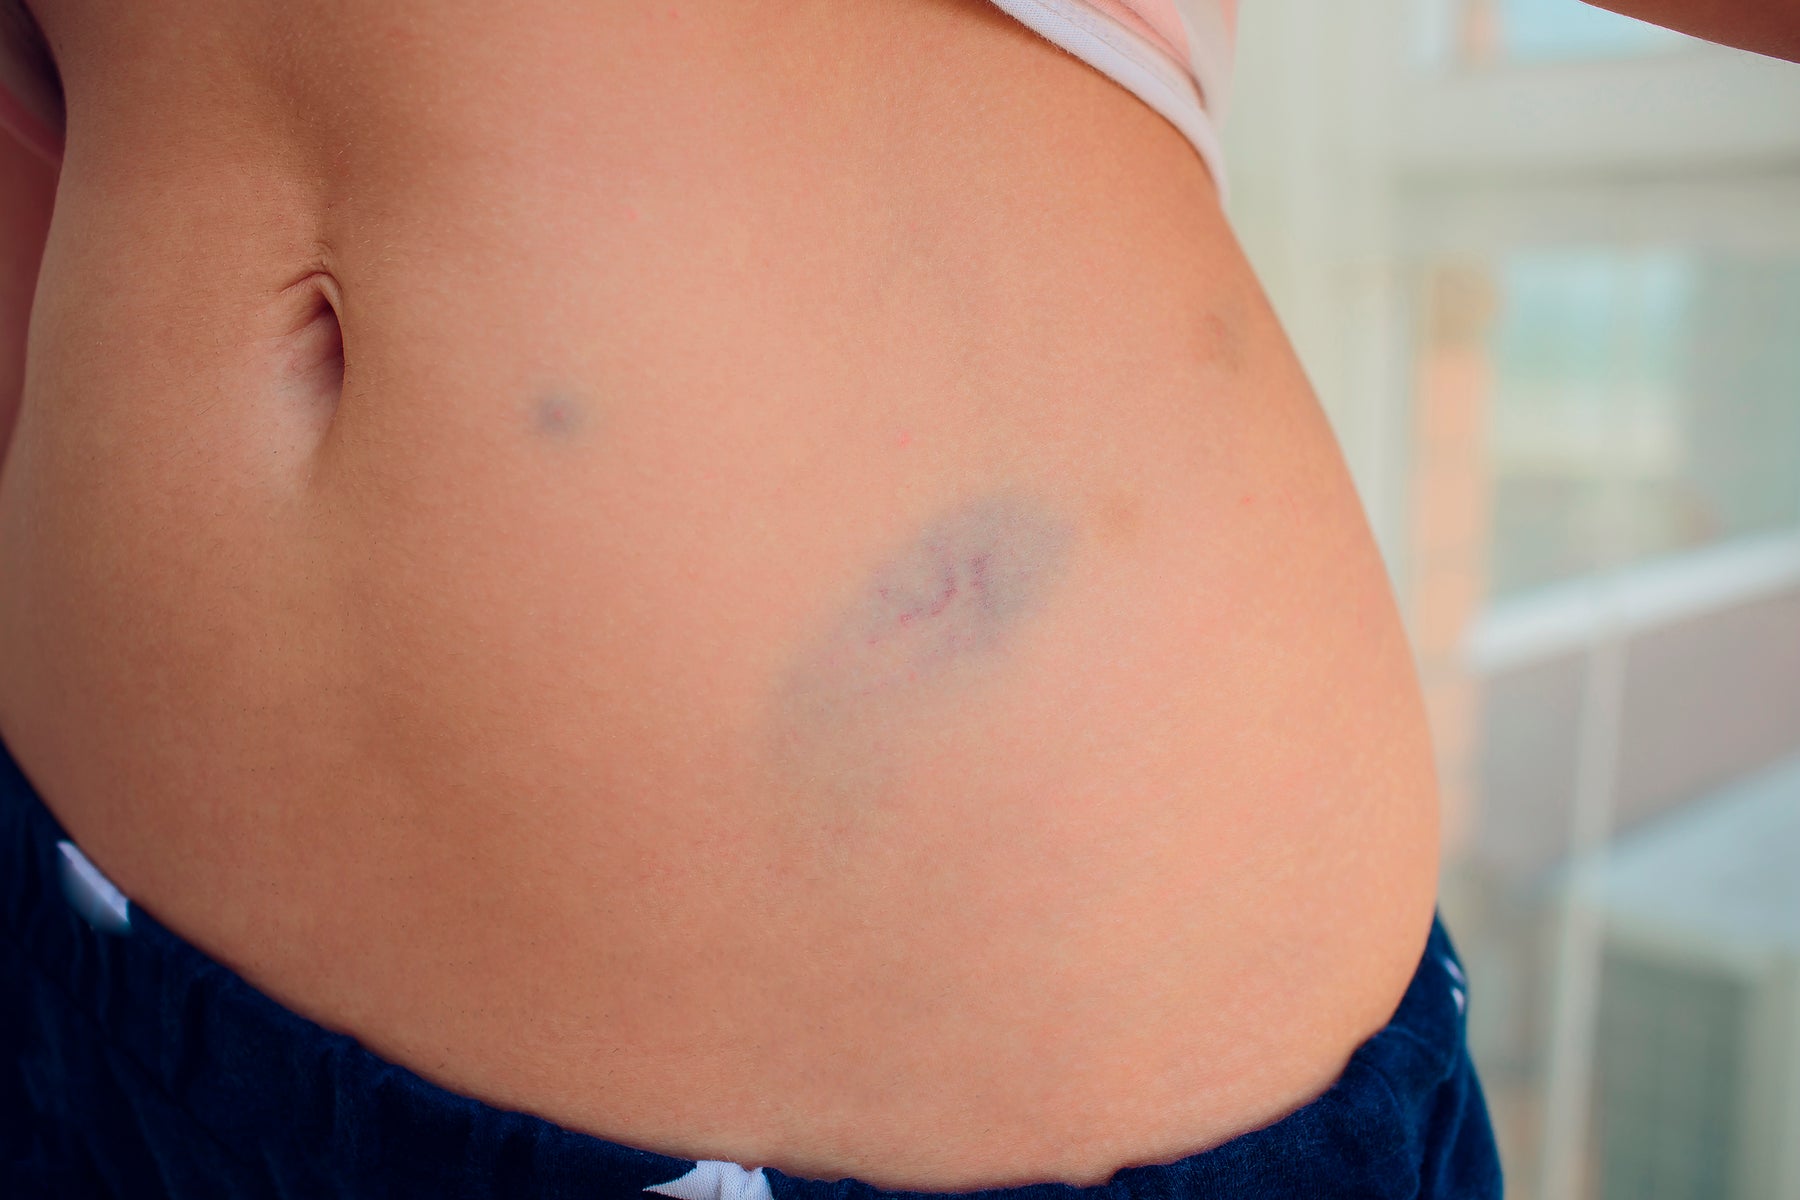 HGH bruise on skin stomach after Human Growth Hormone injections